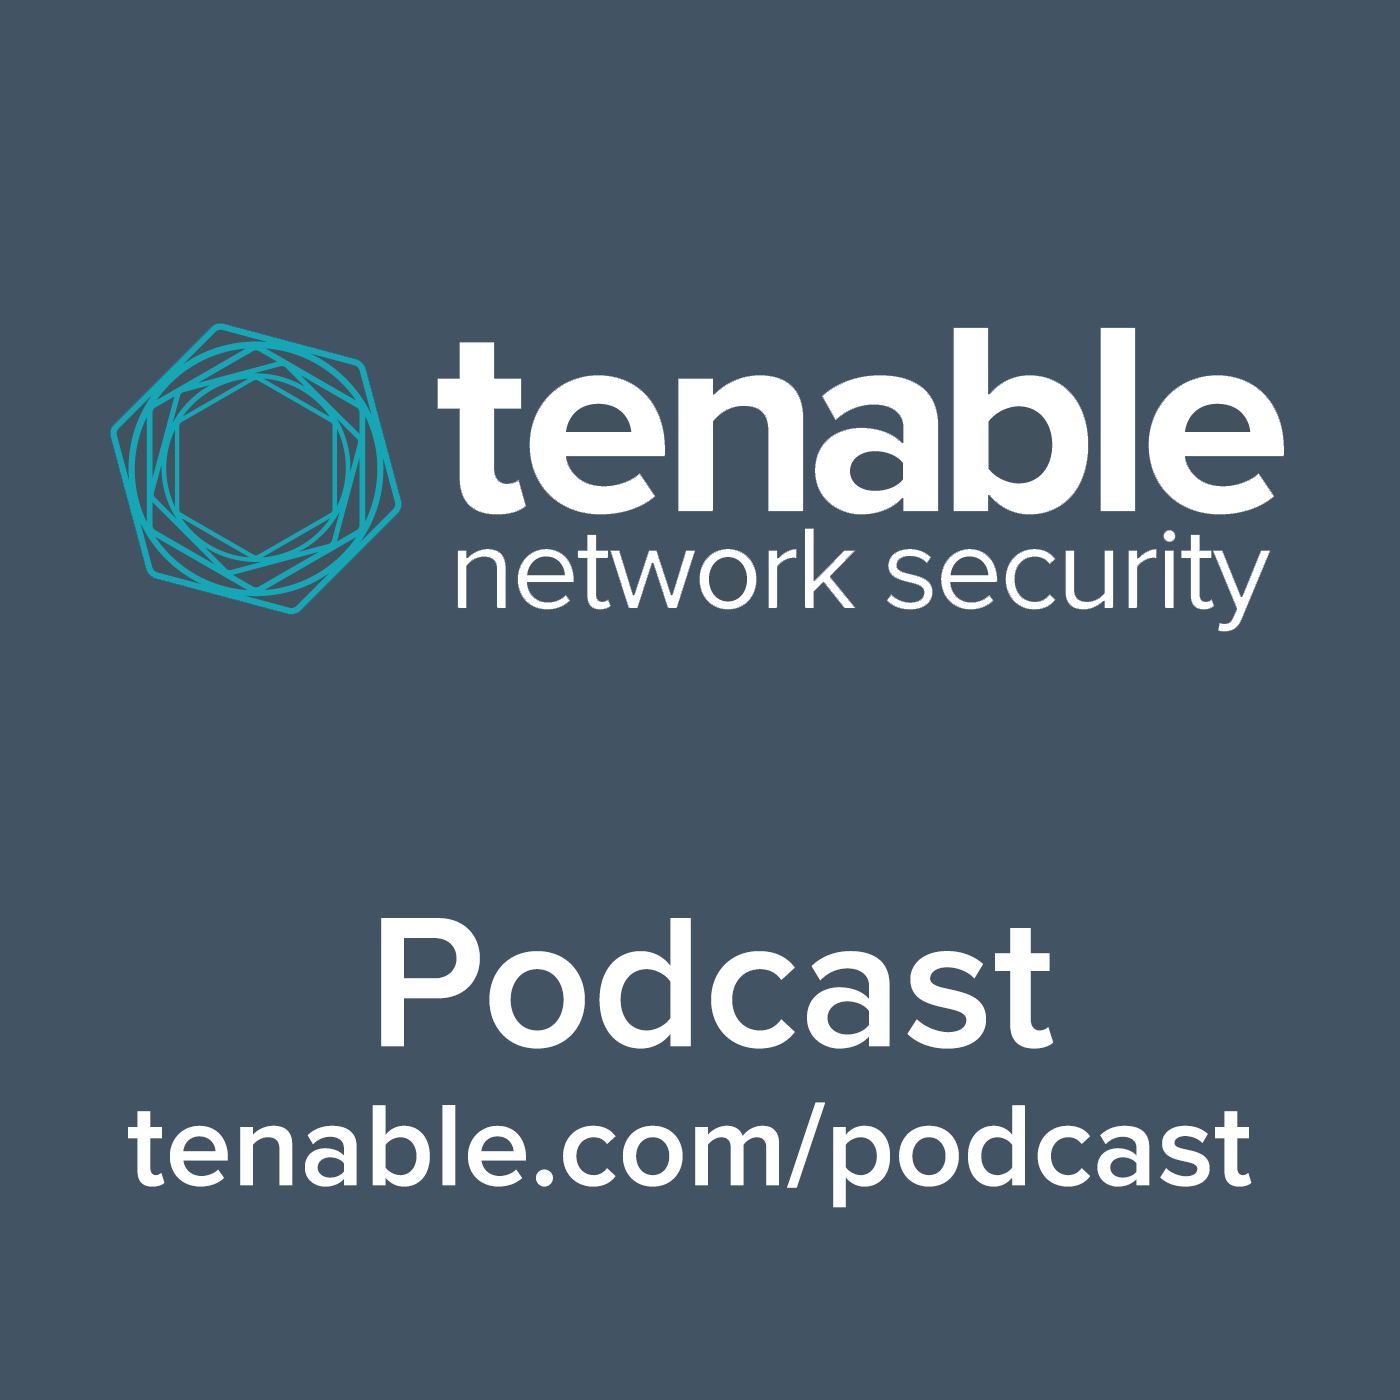 Tenable Network Security Podcast